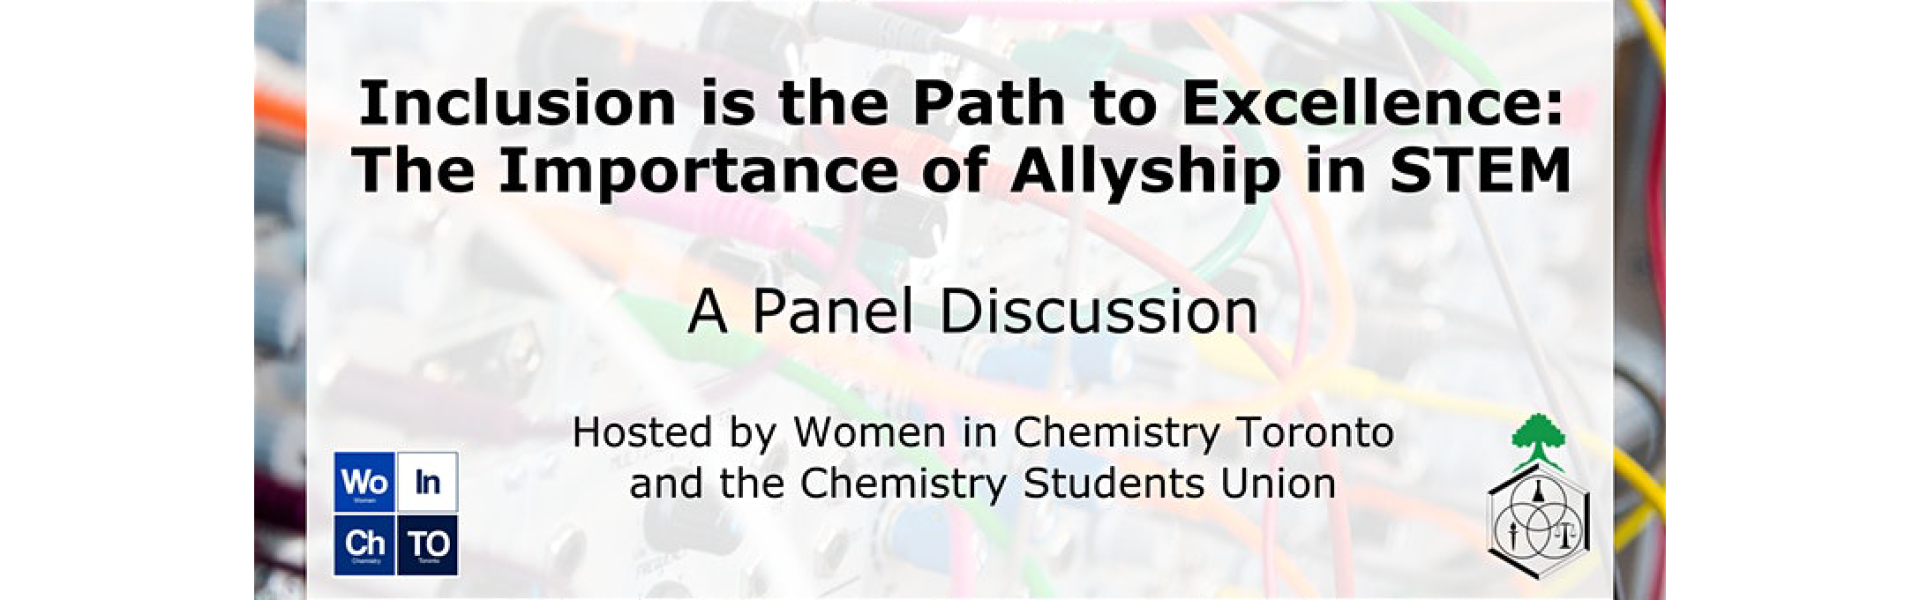 Inclusion is the Path to Excellence: The Importance of Allyship in STEM